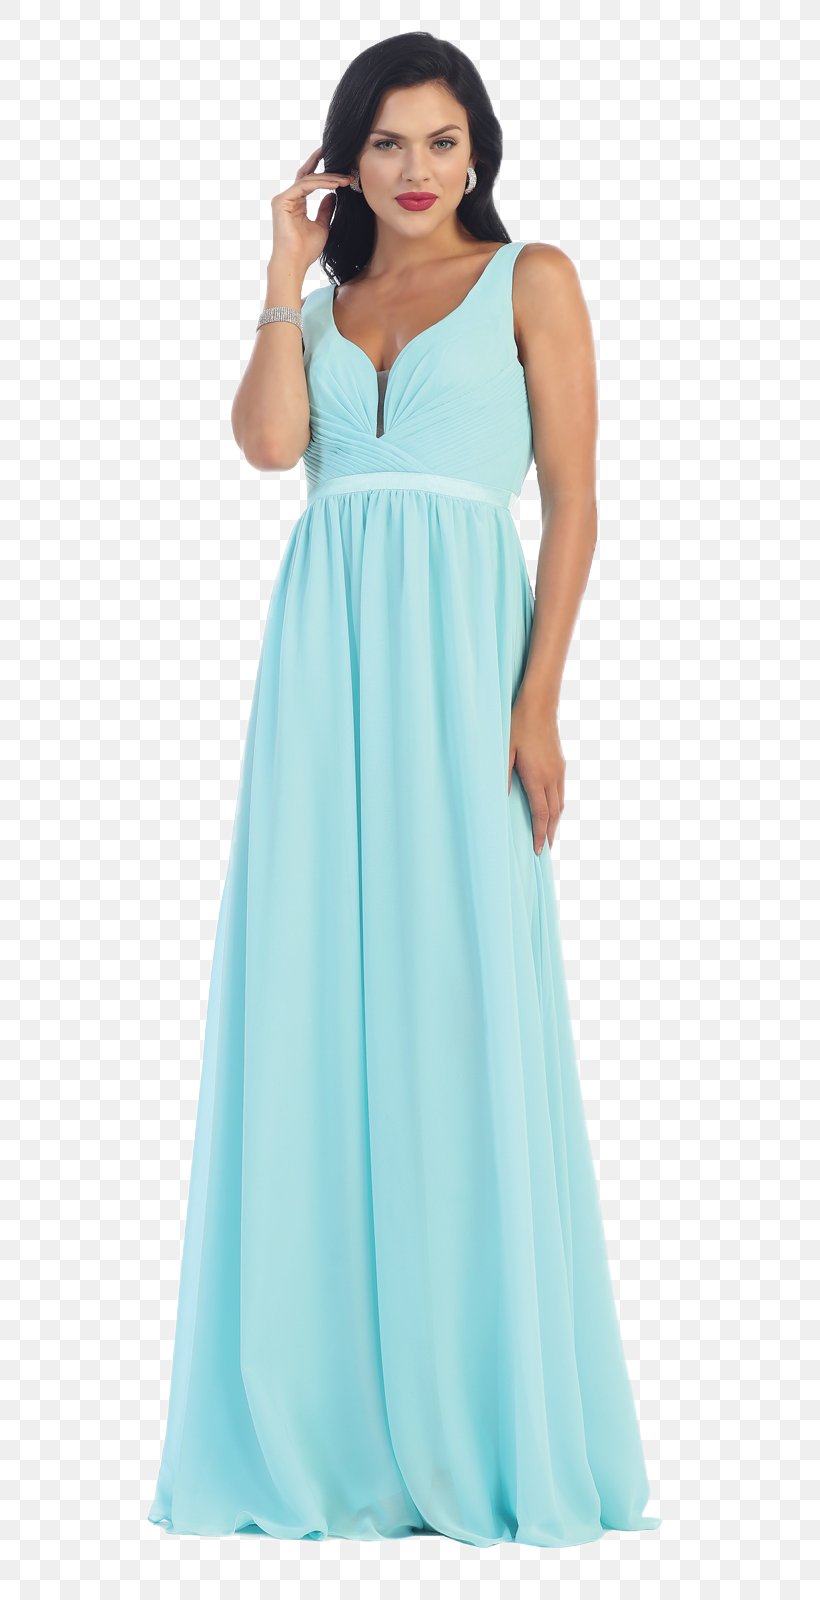 Wedding Dress Gown Bridesmaid Dress, PNG, 729x1600px, Wedding Dress, Aqua, Blue, Bridal Clothing, Bridal Party Dress Download Free